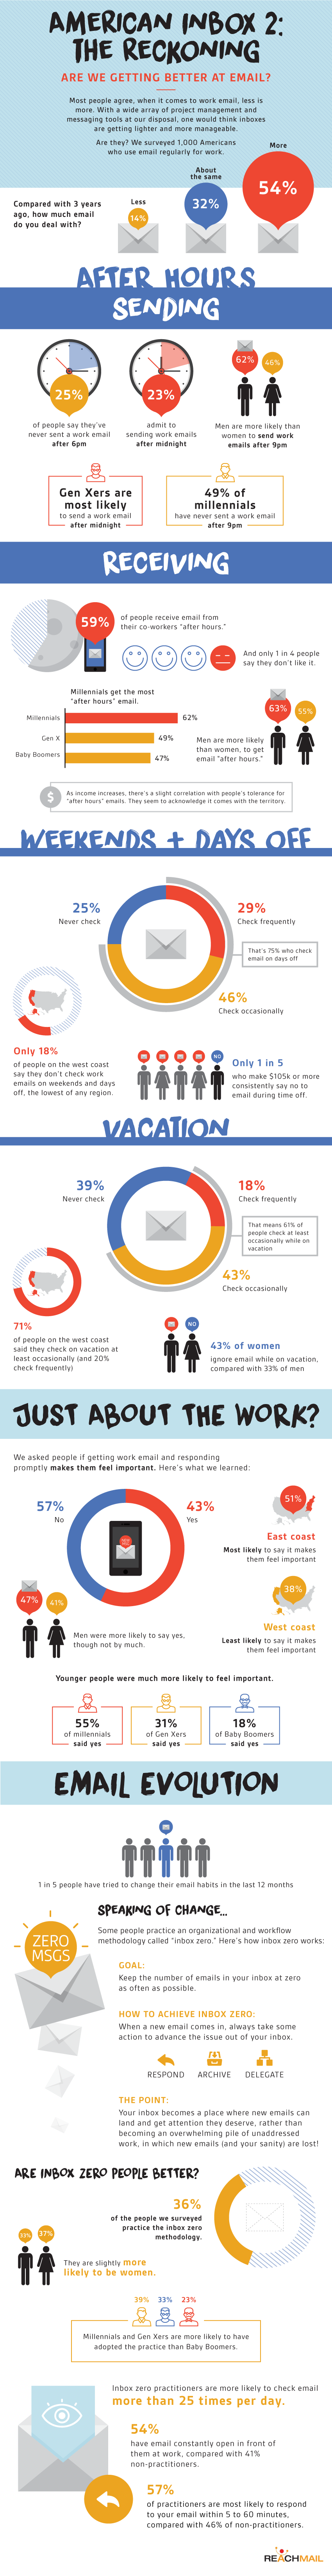 How workers use emails in their leisure time